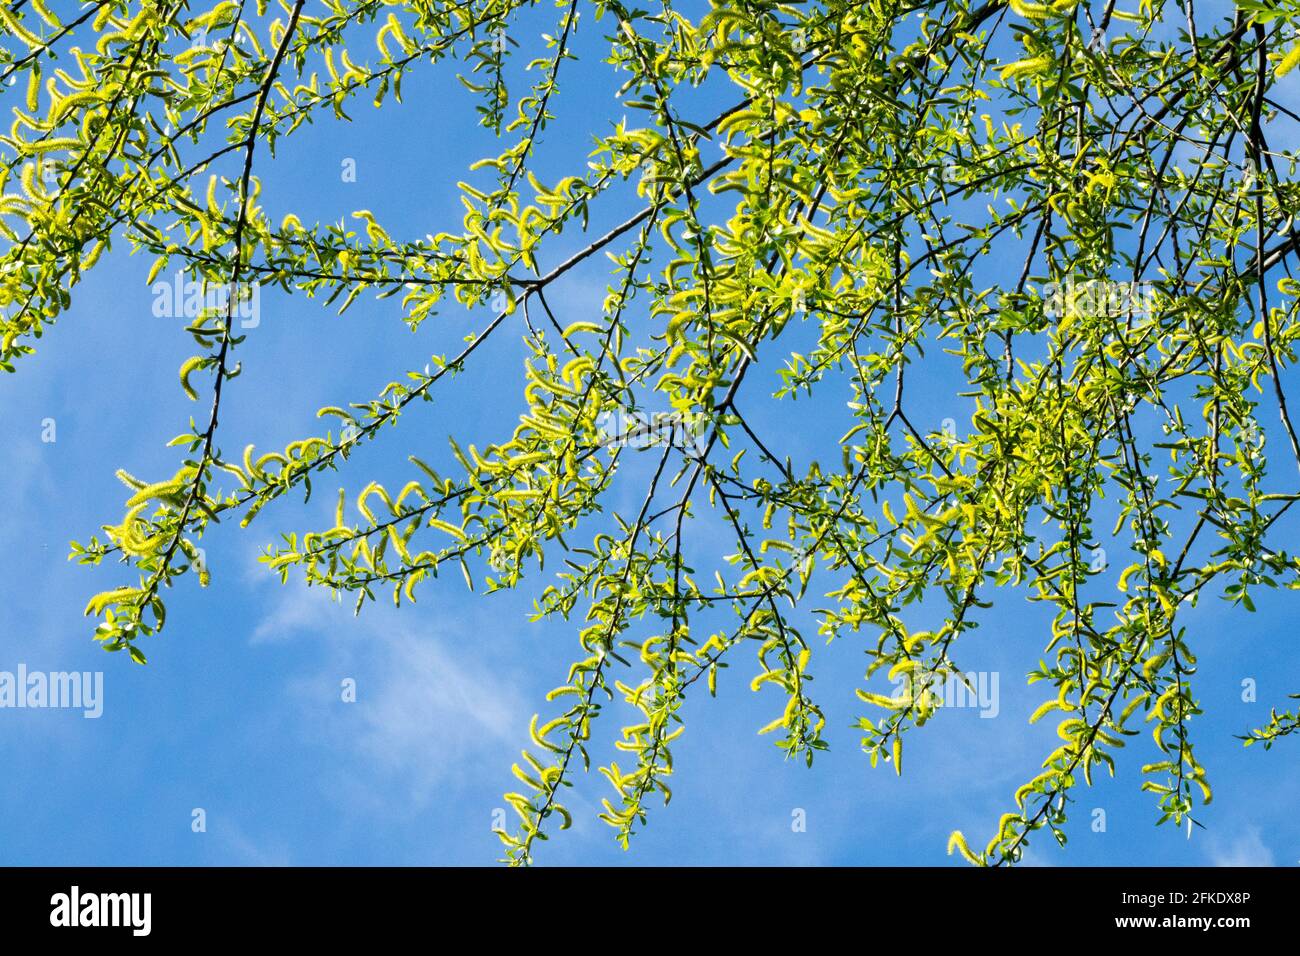 Brittle willow catkins Salix fragilis Branches Spring Crack willow Twigs Against blue sky Willow Aments Brittle willow Branches Plant Spring pollen Stock Photo